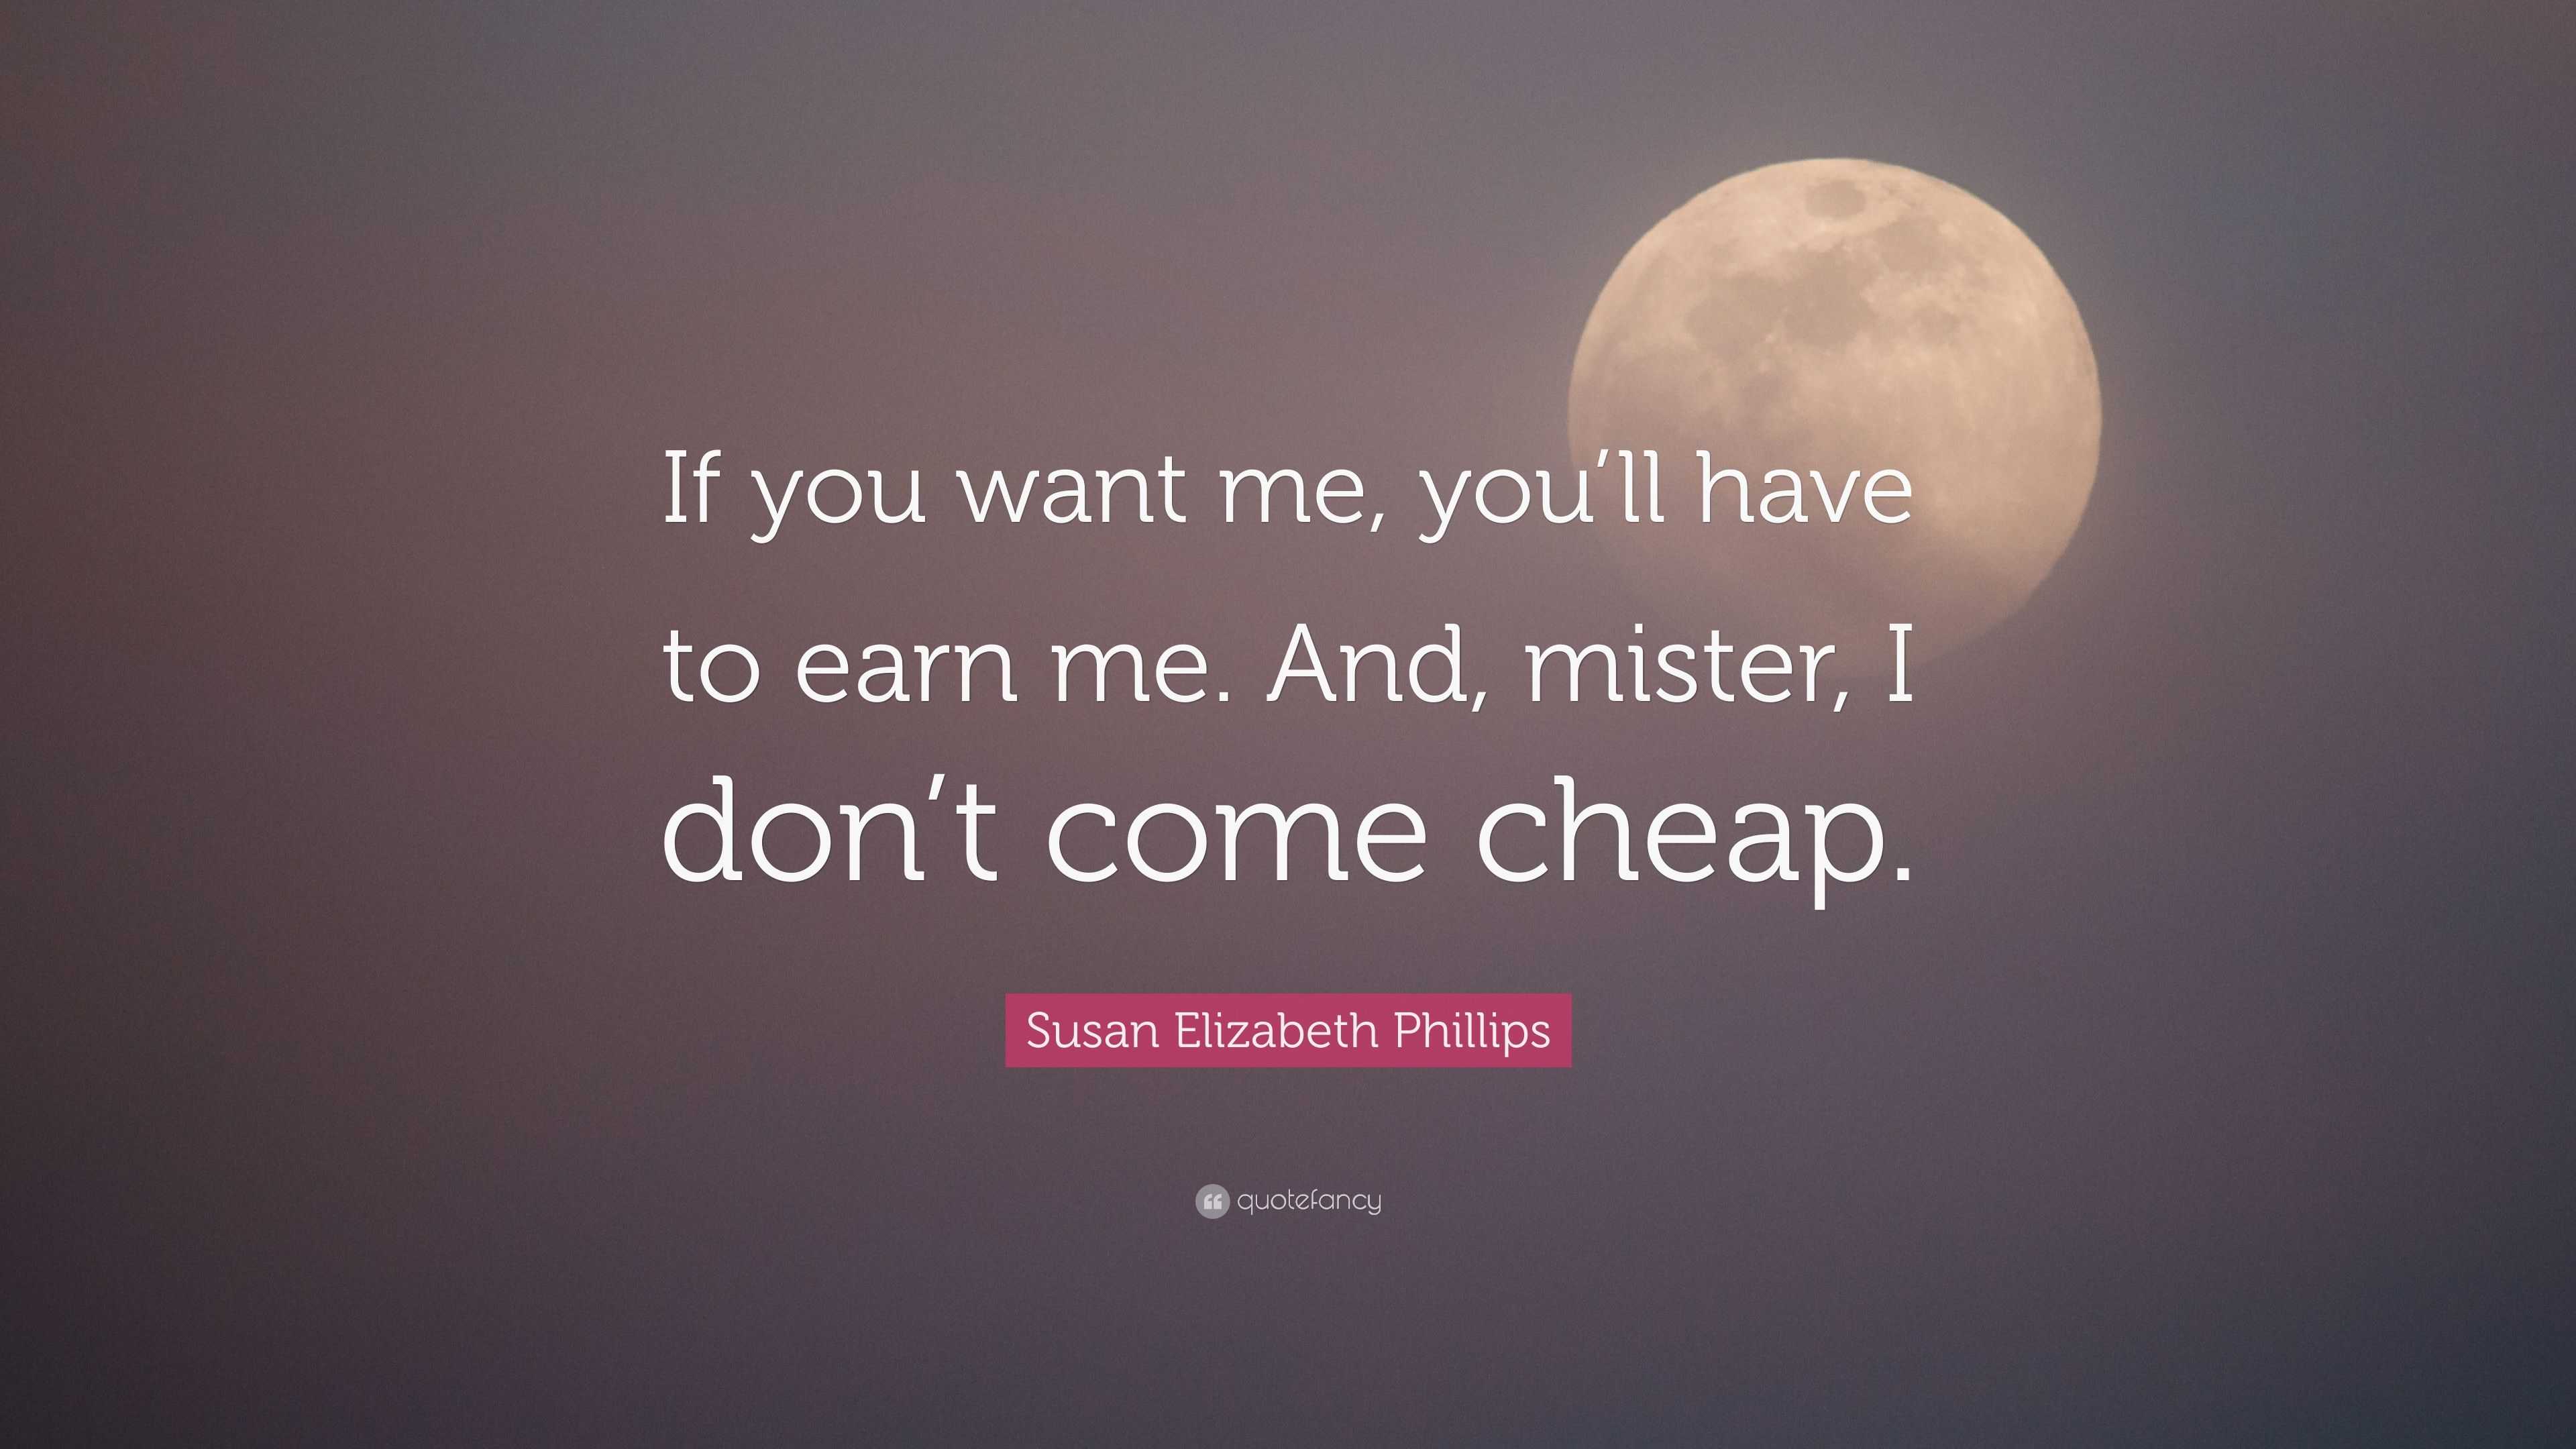 Susan Elizabeth Phillips Quote If You Want Me You Ll Have To Earn Me And Mister